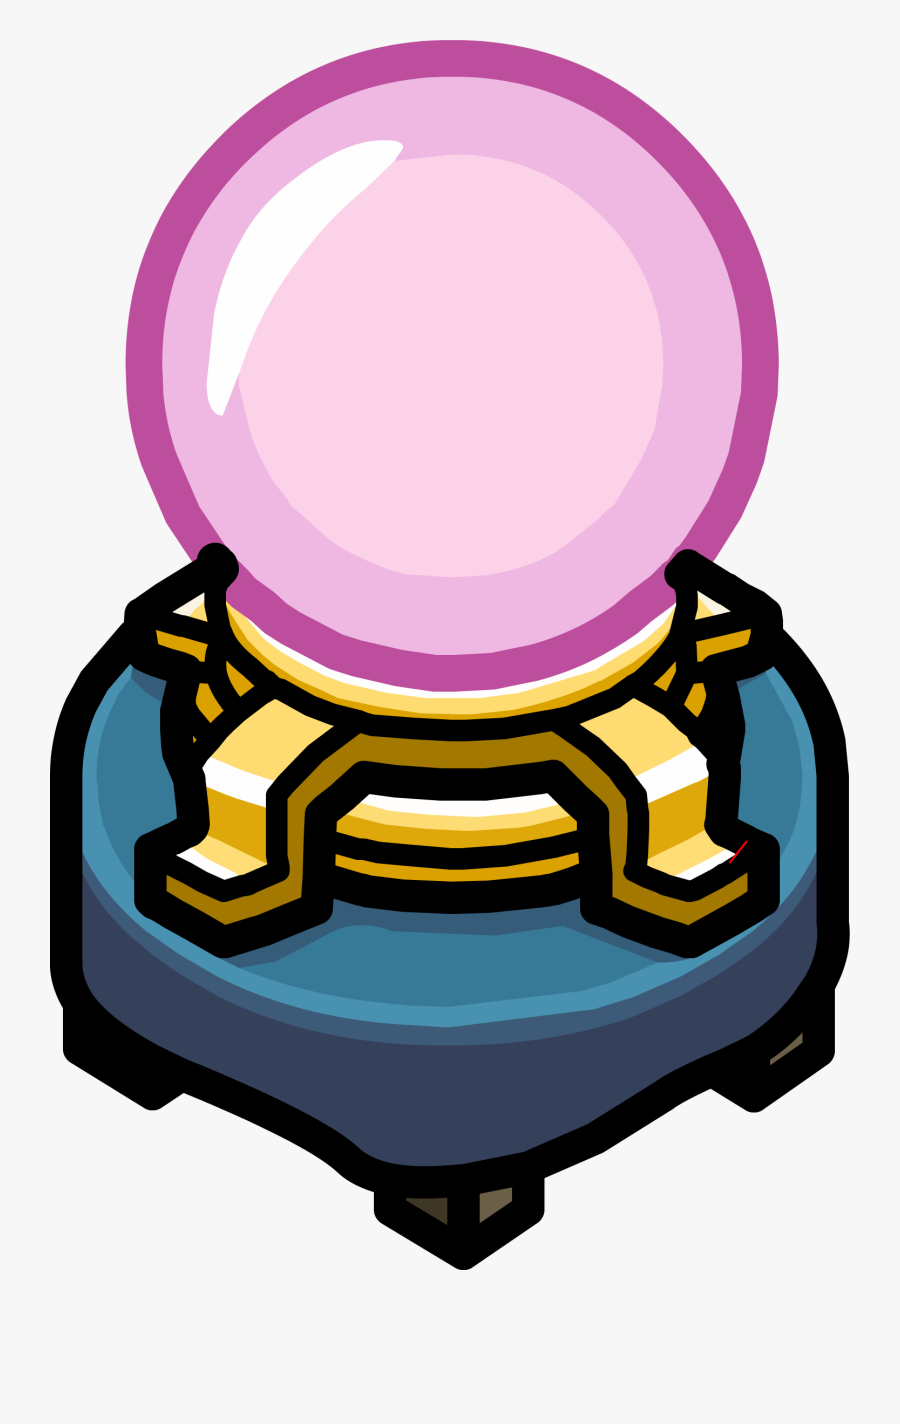 Club Penguin Wiki - Magical Crystal Ball Clipart, Transparent Clipart